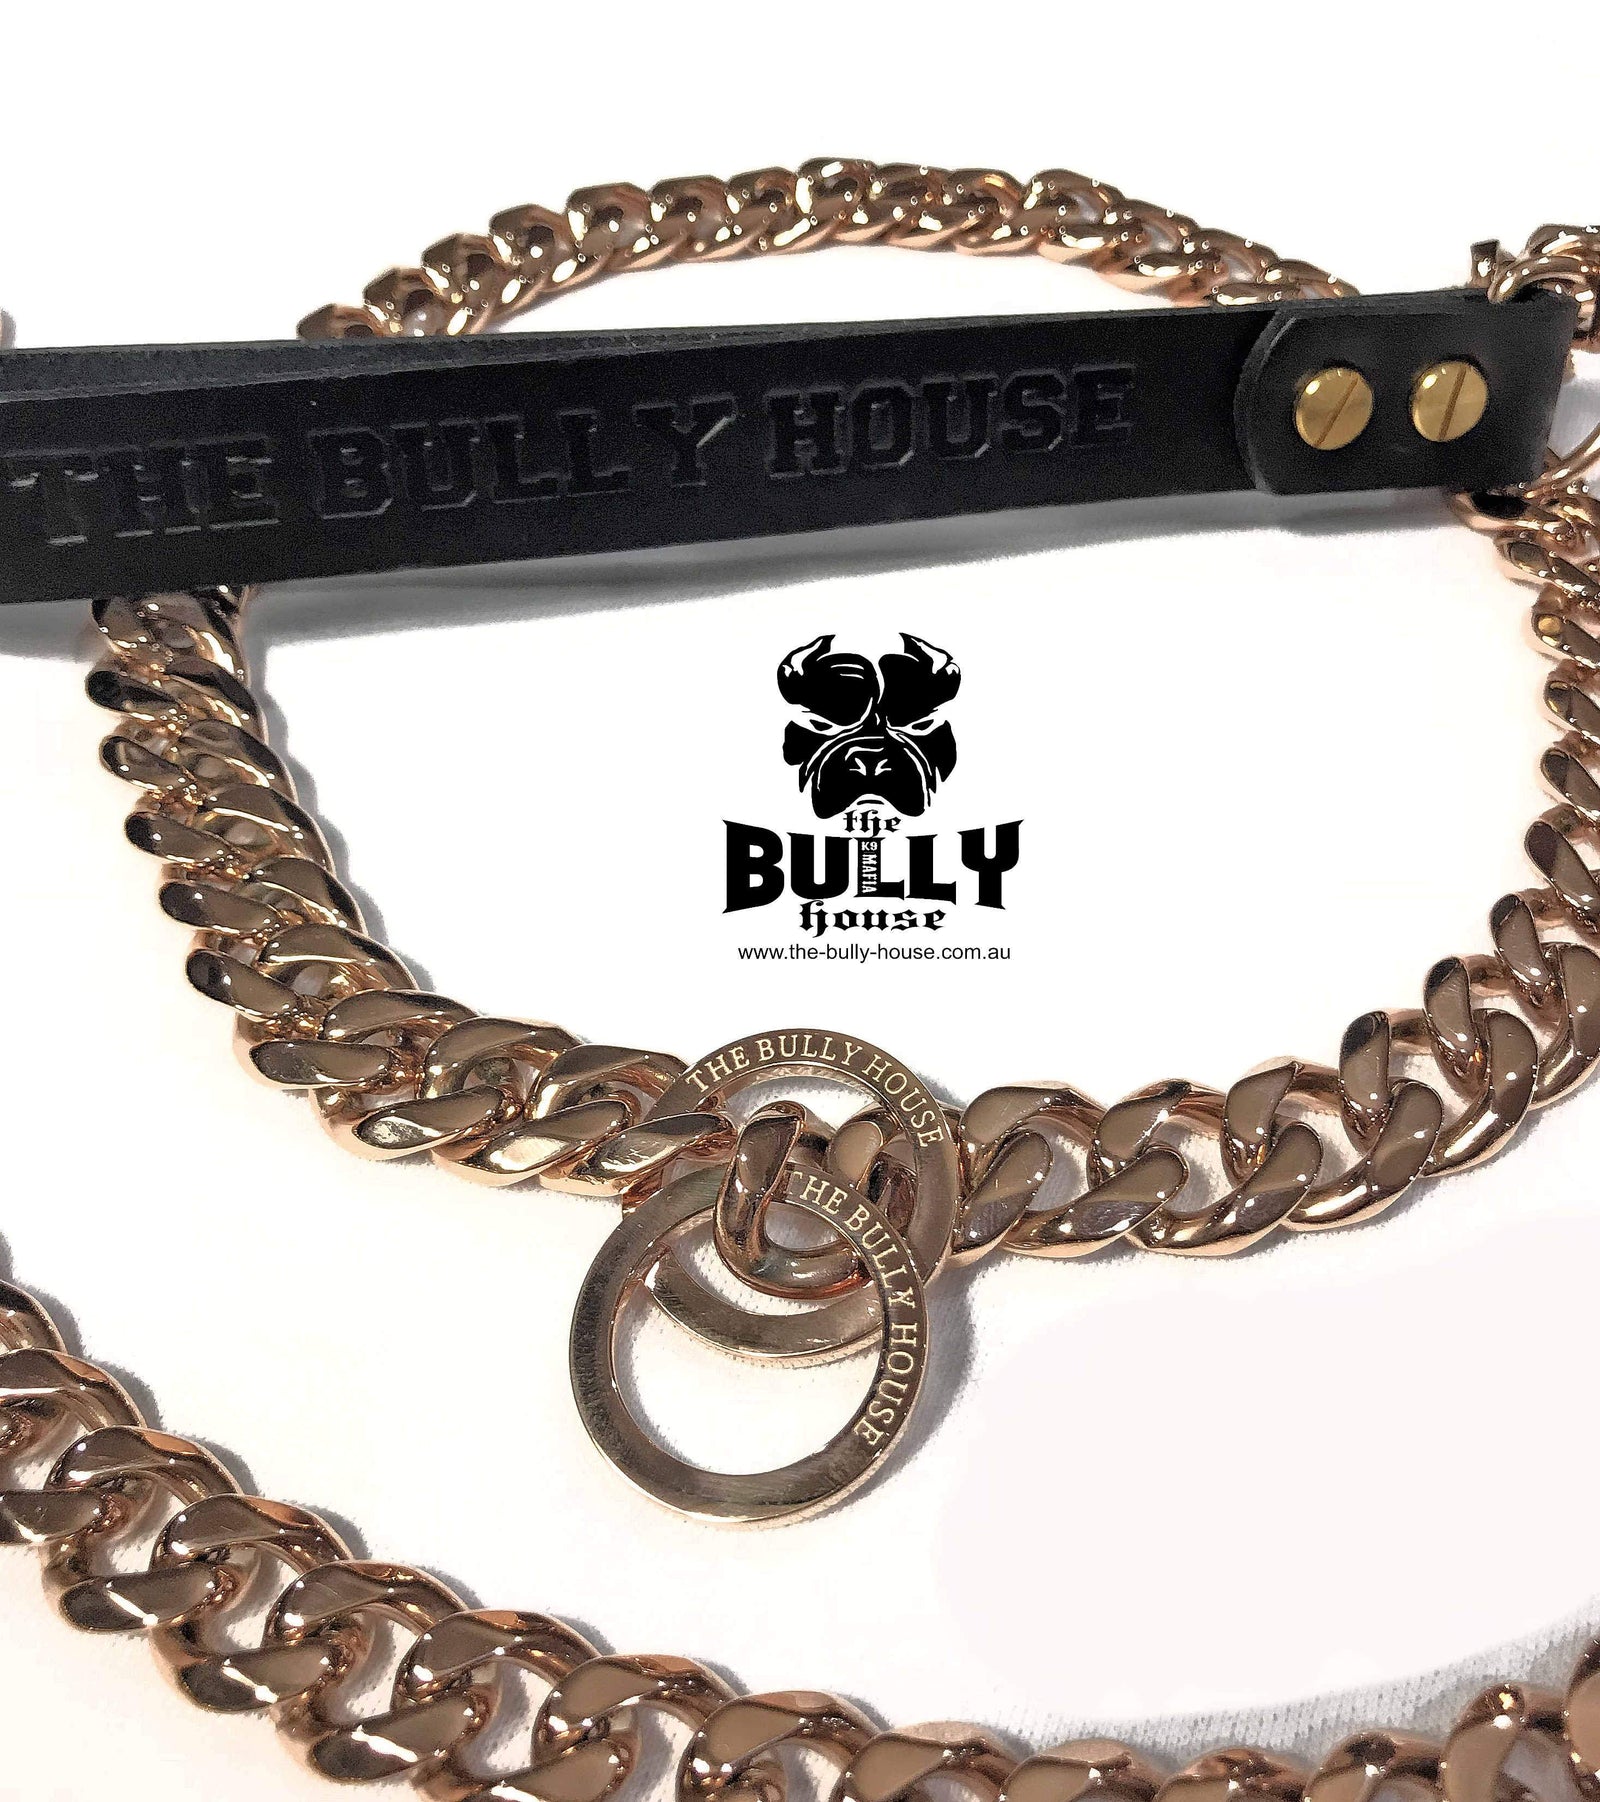 (Pre Order Now - Arriving approx end of DEC) The Bully House "CHECK CHAIN Collection" - ROSE GOLD 20mm Wide